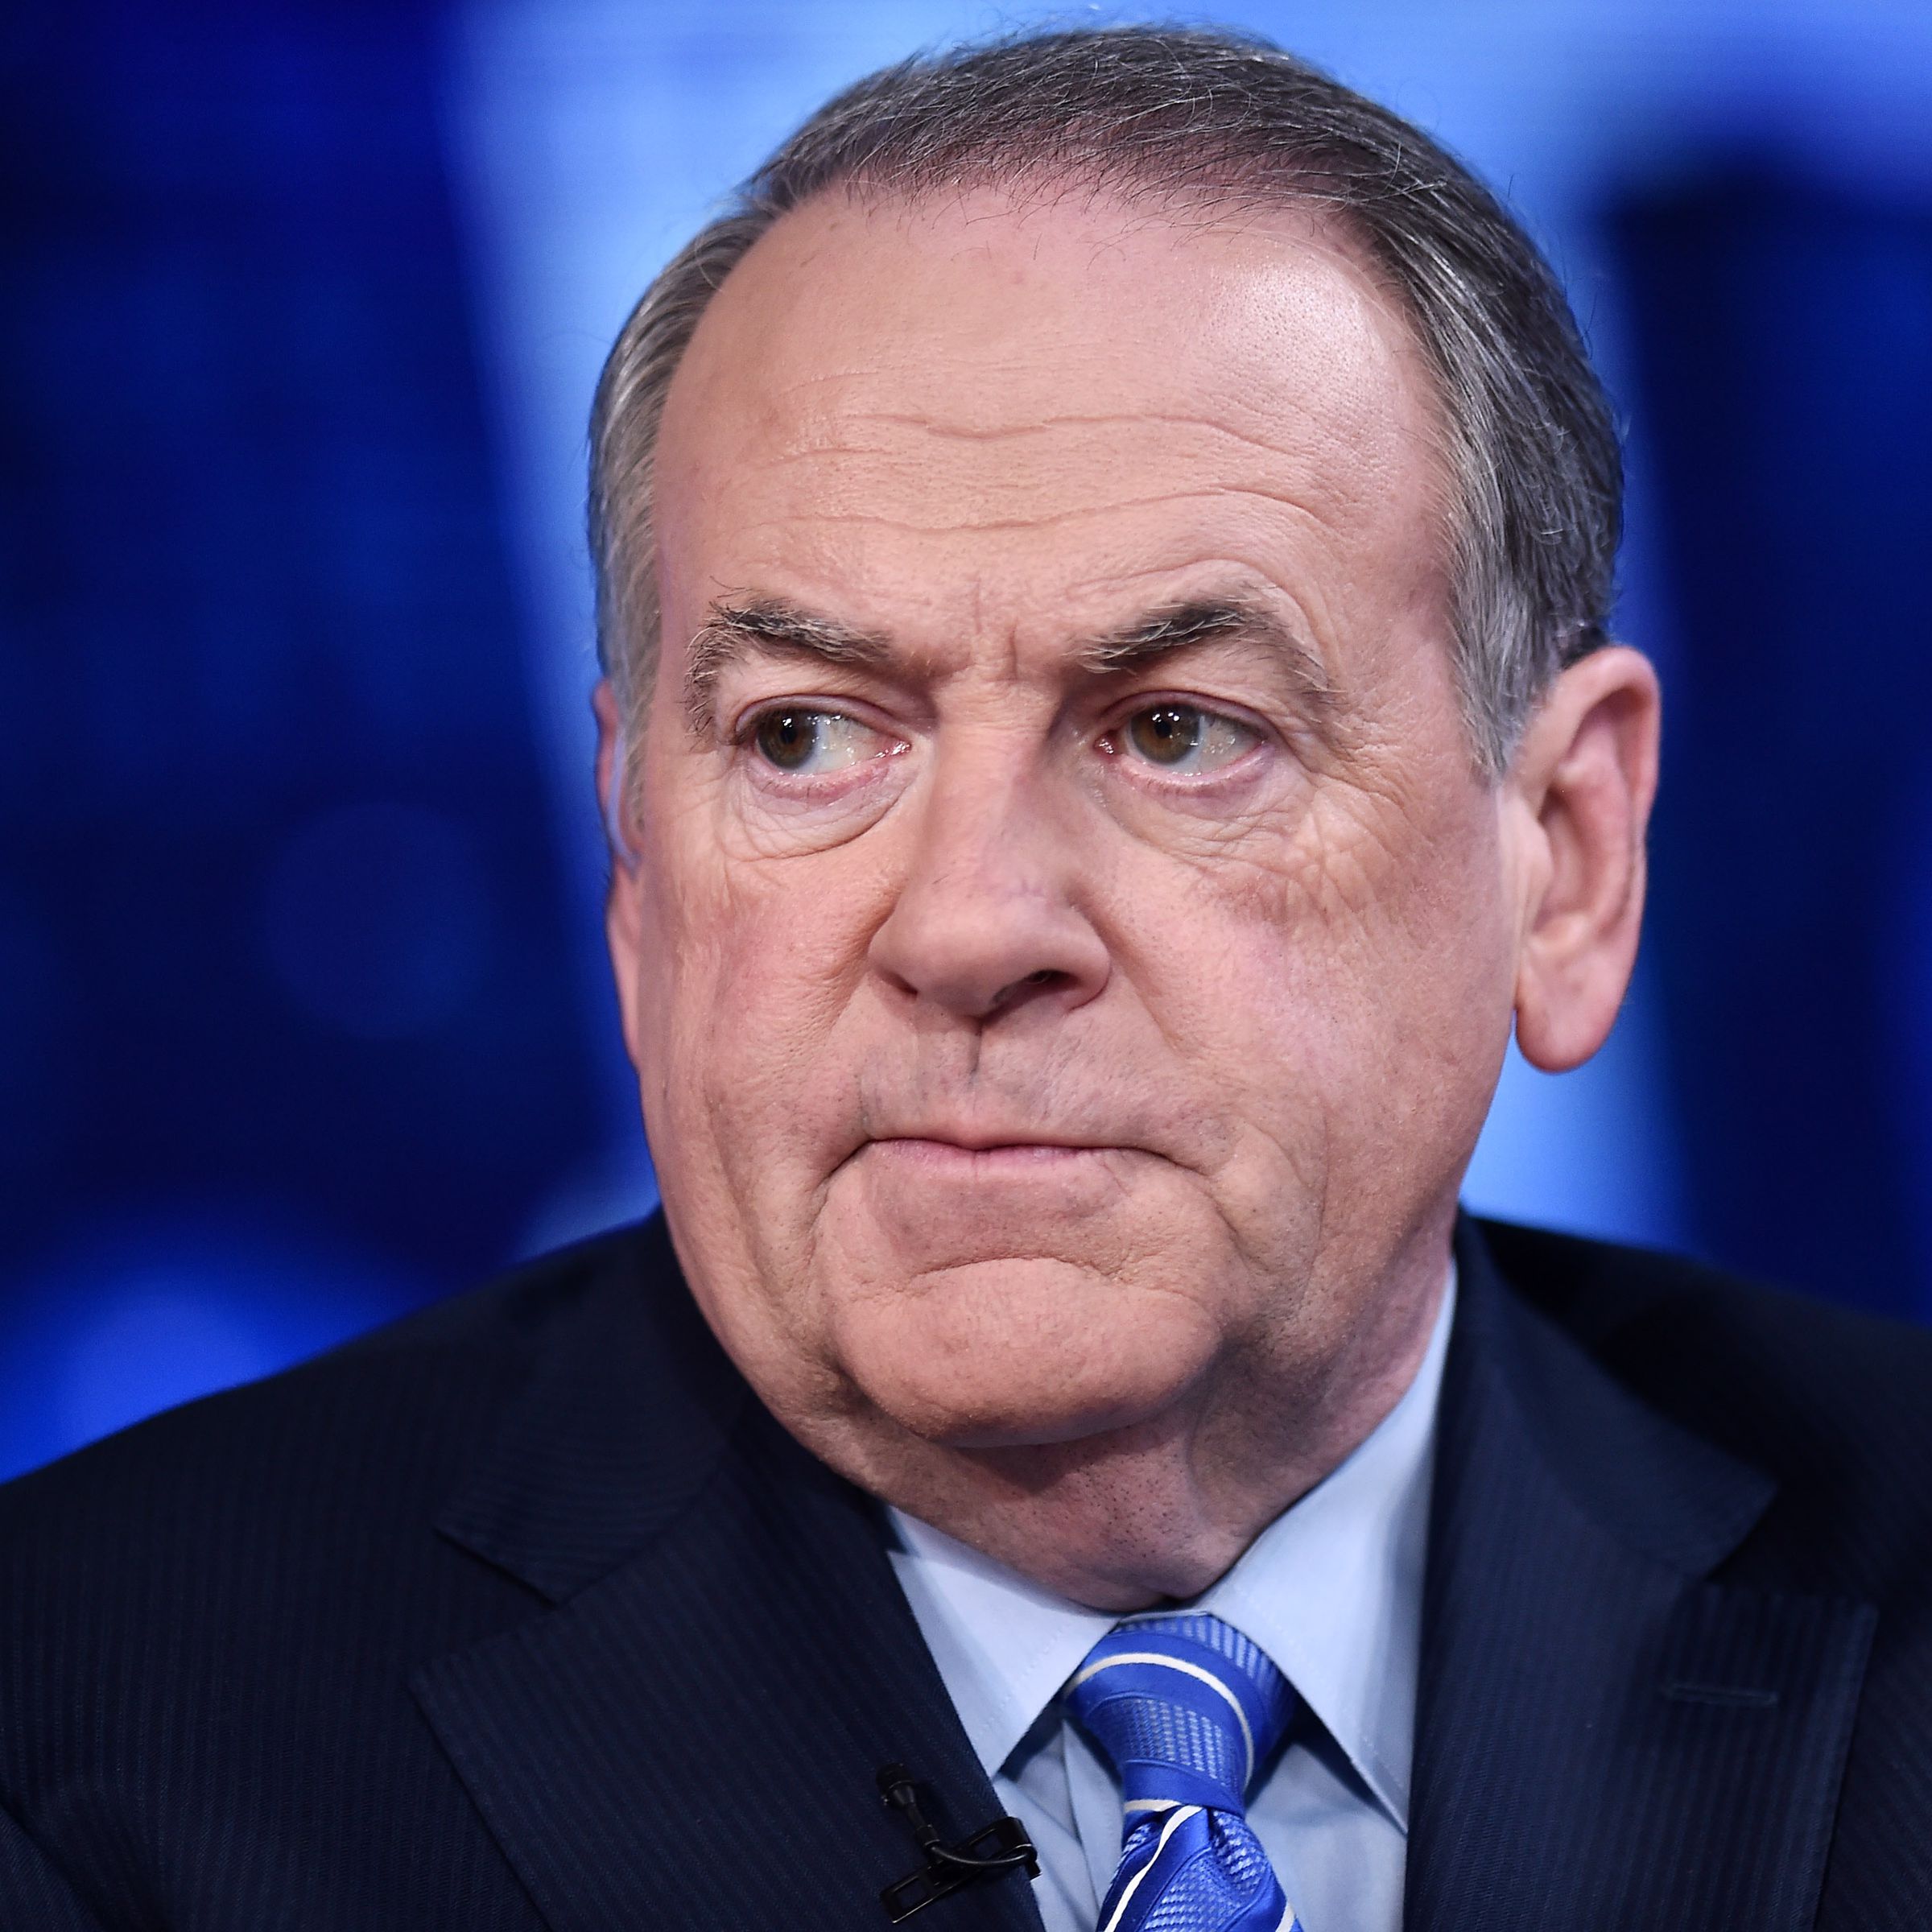 Mike Huckabee photographed from the shoulders up. He is wearing a suit and has a tense look on his face.